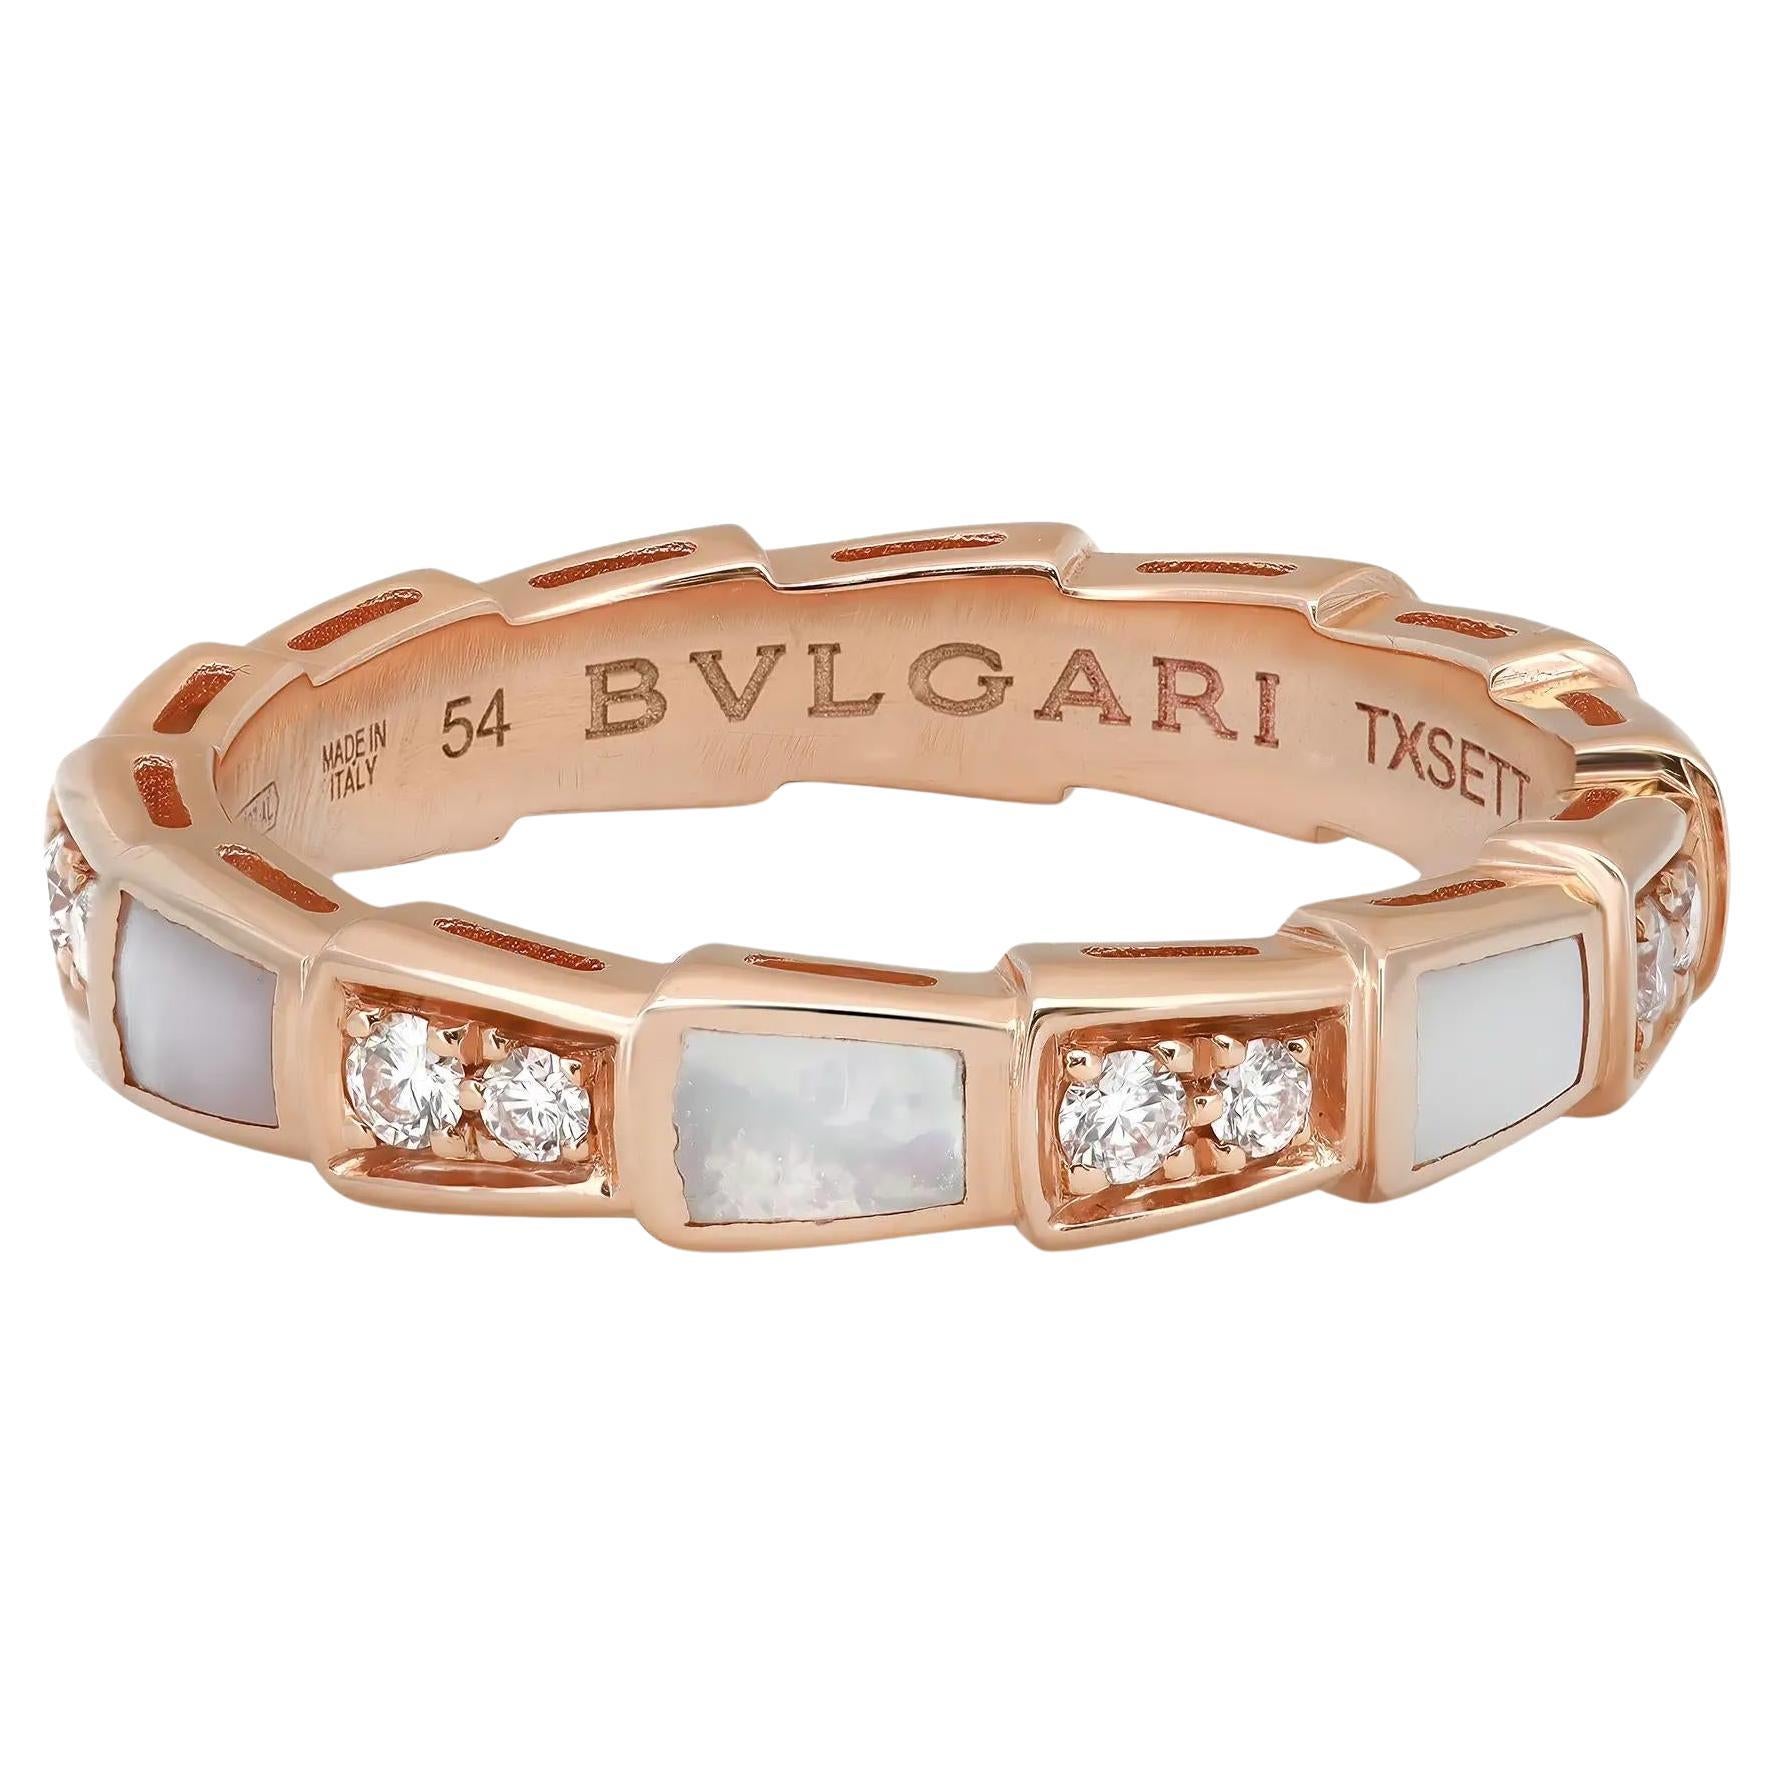 Bvlgari Serpenti Viper Diamond & Mother Of Pearl Band Ring 18K Rose Gold 54 US 7 For Sale